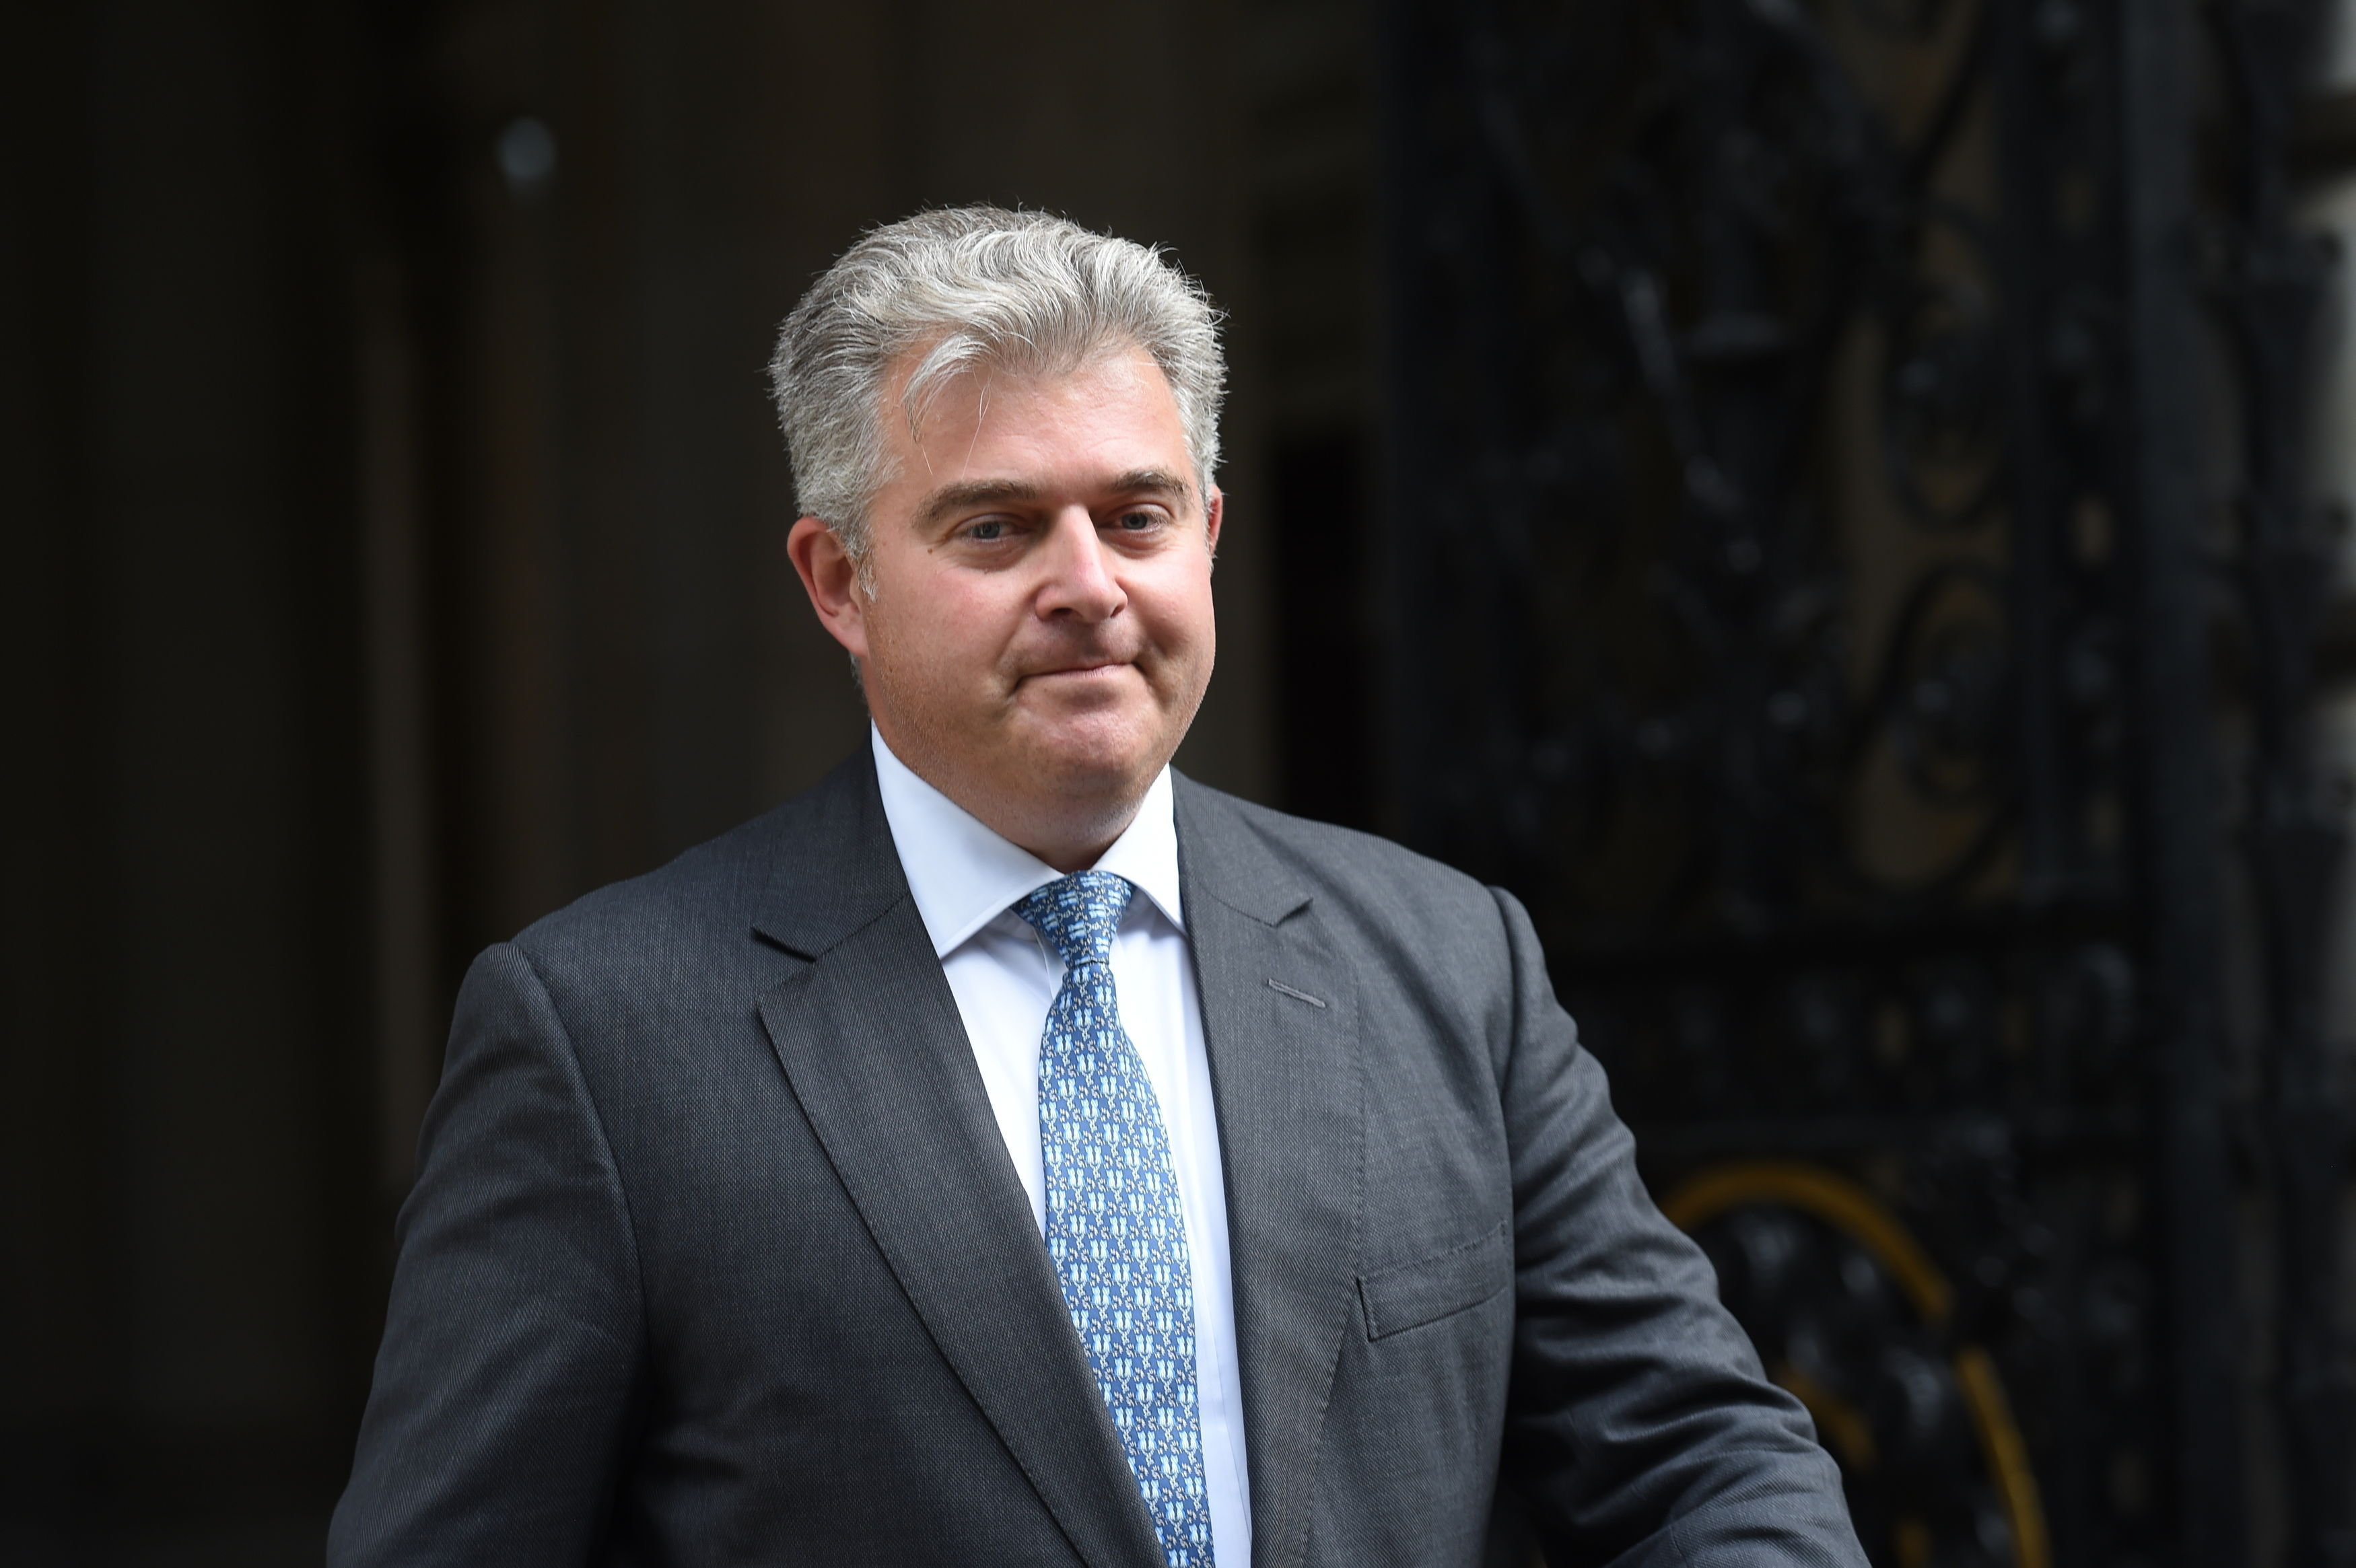 <strong>Immigration Minister Brandon Lewis is busy with "difficult reading"&nbsp;</strong>